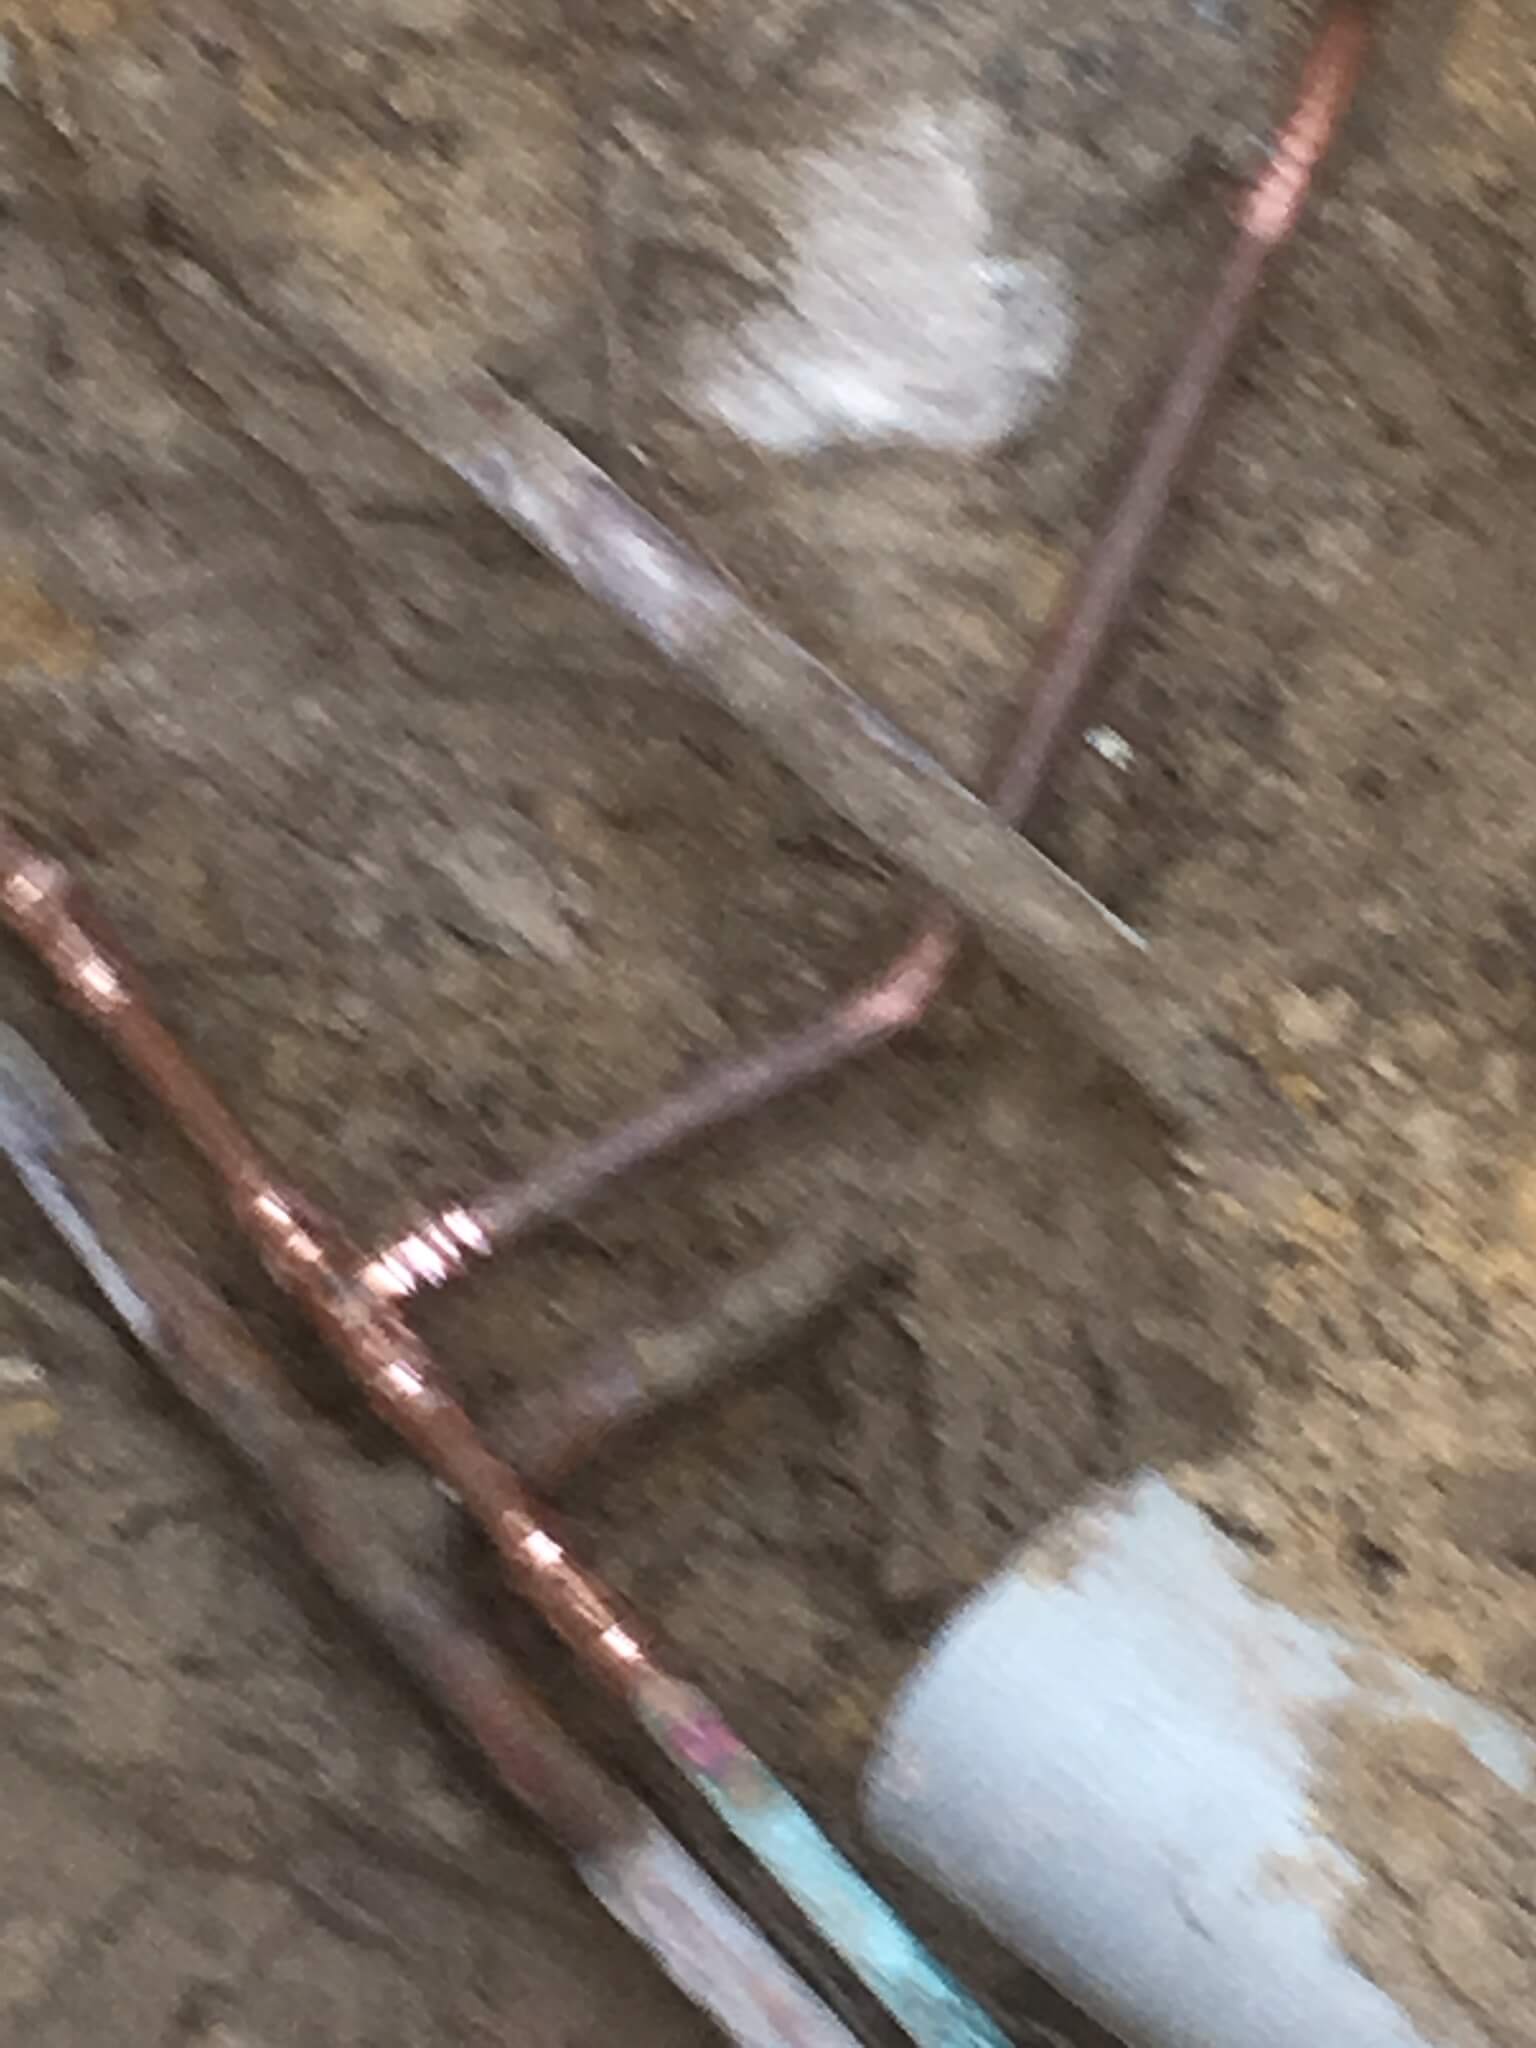 Everyday Plumbers Residential Bursts and Leak Detection Plumber - Newly Repaired Copper Pipes 1907